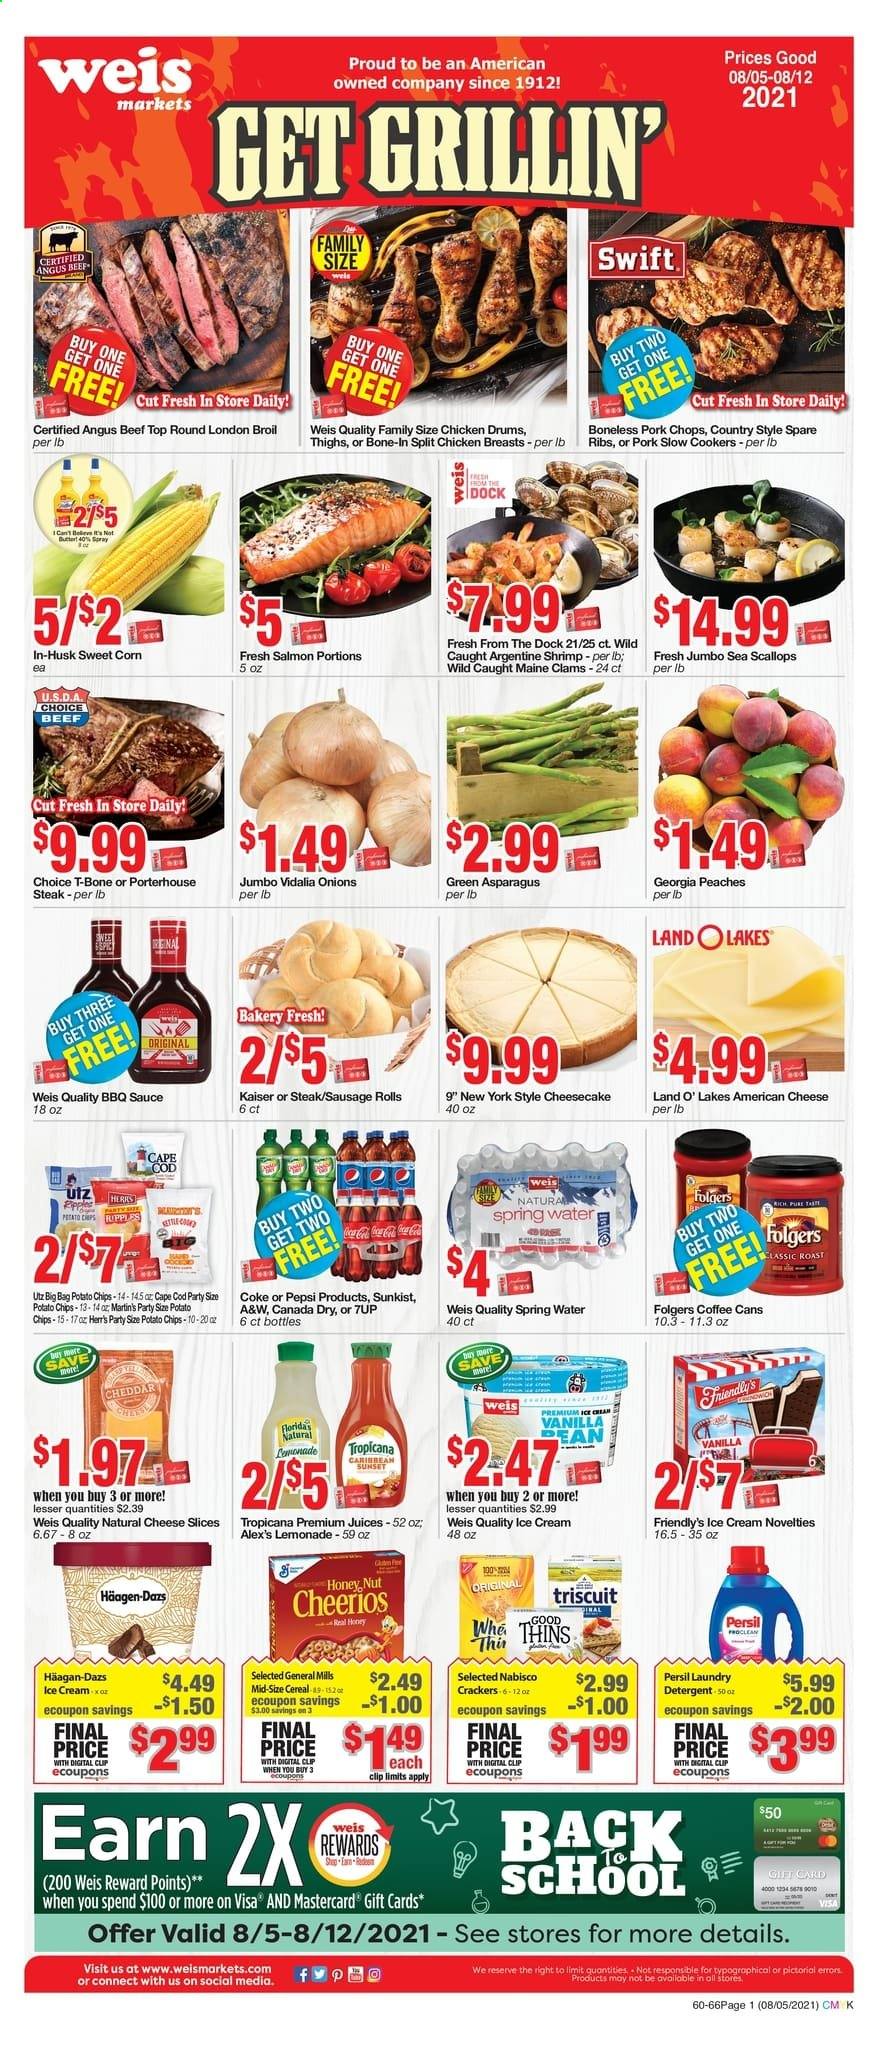 thumbnail - Weis Flyer - 08/05/2021 - 08/12/2021 - Sales products - sausage rolls, asparagus, corn, onion, sweet corn, chicken breasts, beef meat, t-bone steak, steak, pork chops, pork meat, pork spare ribs, clams, cod, salmon, scallops, shrimps, sauce, sausage, american cheese, sliced cheese, cheese, ice cream, Häagen-Dazs, Friendly's Ice Cream, crackers, potato chips, chips, Thins, cereals, Cheerios, BBQ sauce, Canada Dry, Coca-Cola, lemonade, Pepsi, juice, 7UP, A&W, spring water, coffee, Folgers, detergent, Persil, laundry detergent, cup, peaches. Page 1.